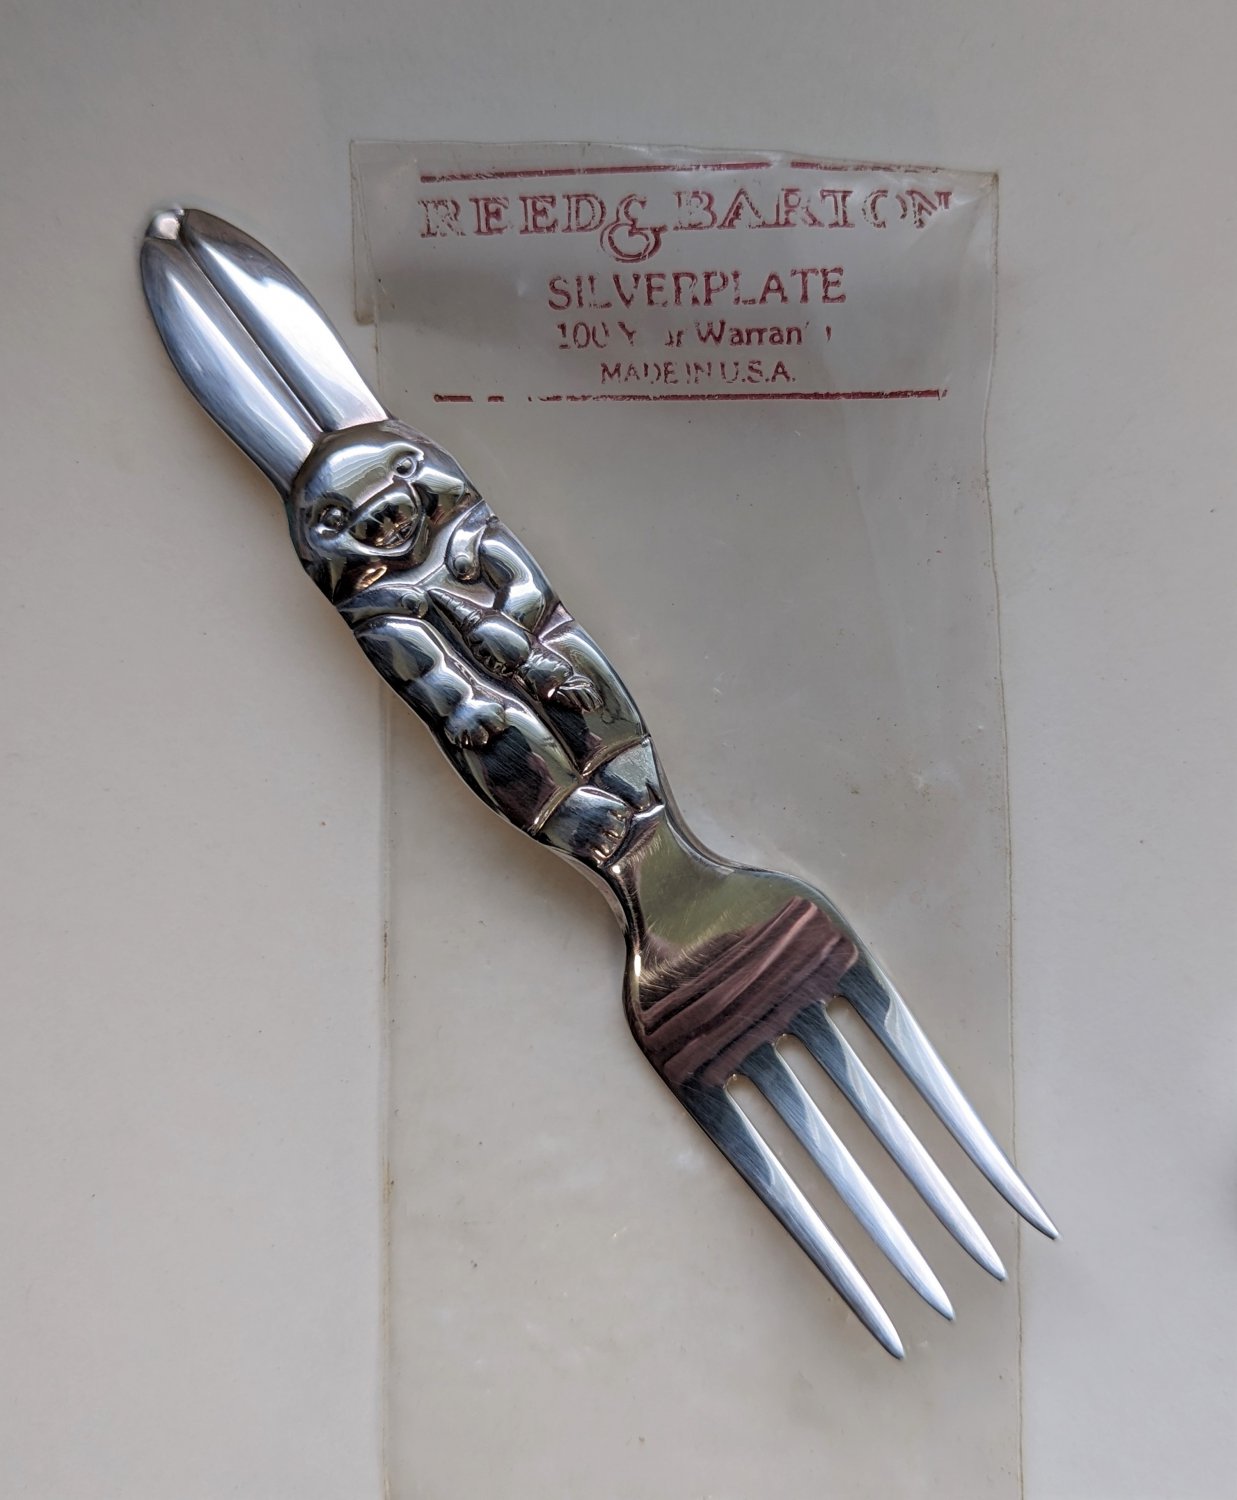 Reed & Barton Silver Plate Baby Bunny Fork